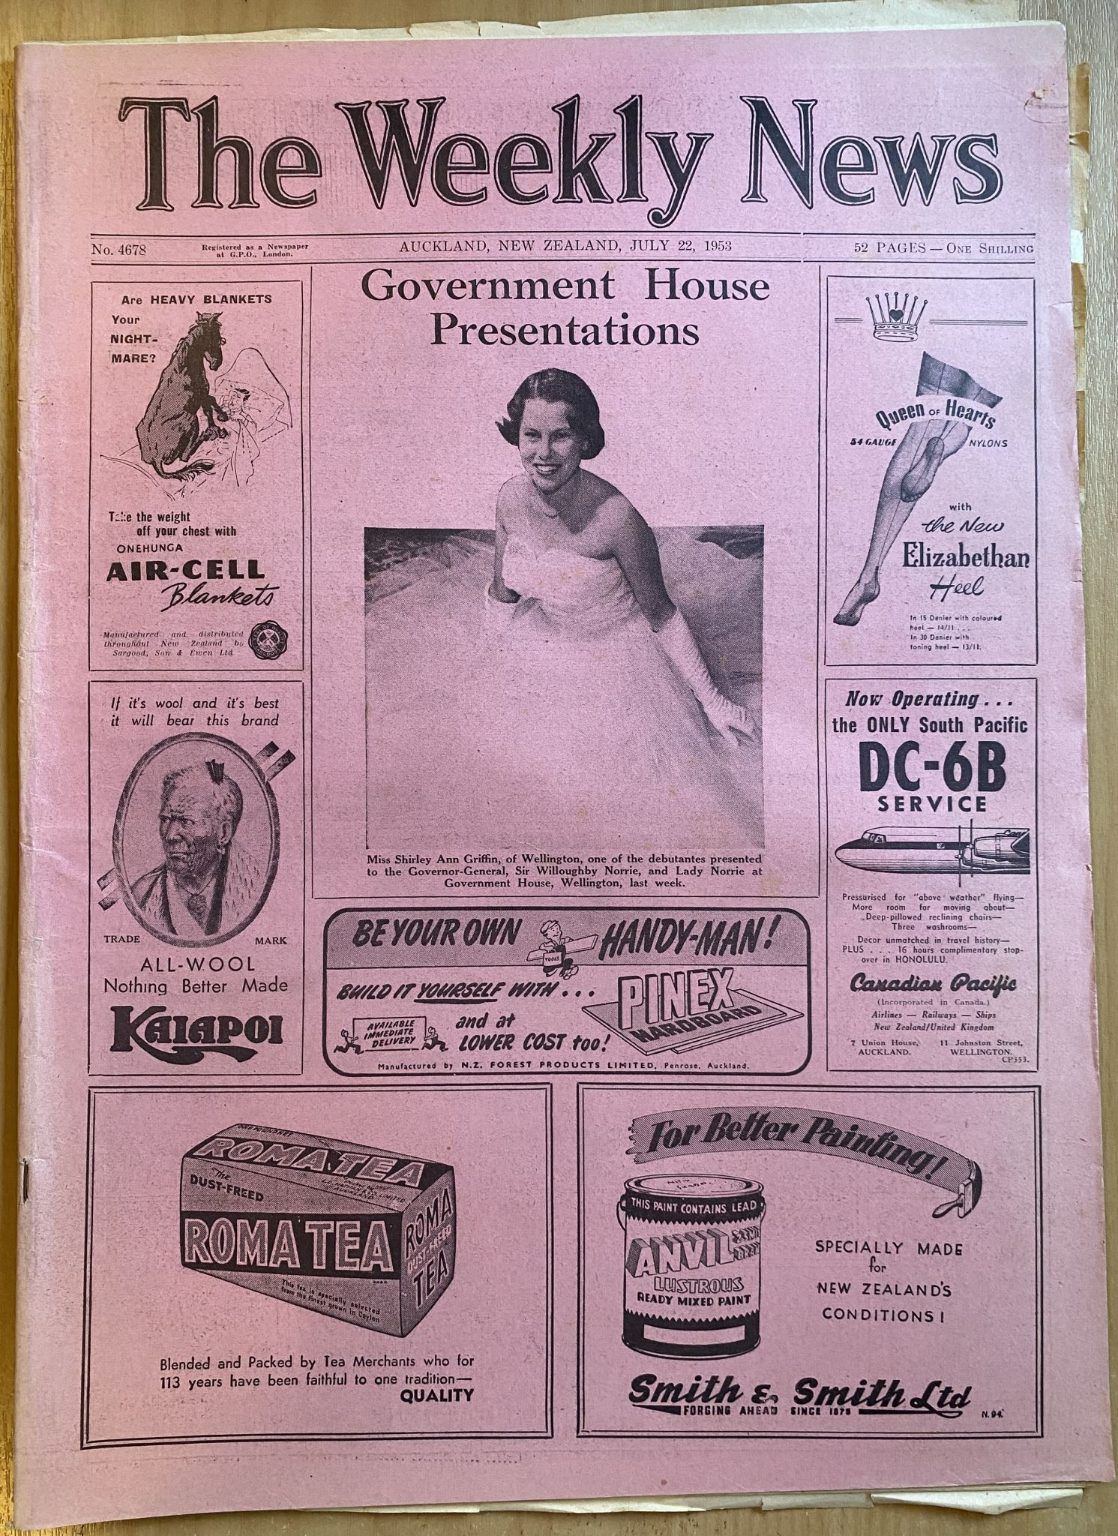 OLD NEWSPAPER: The Weekly News - No. 4678, 22 July 1953